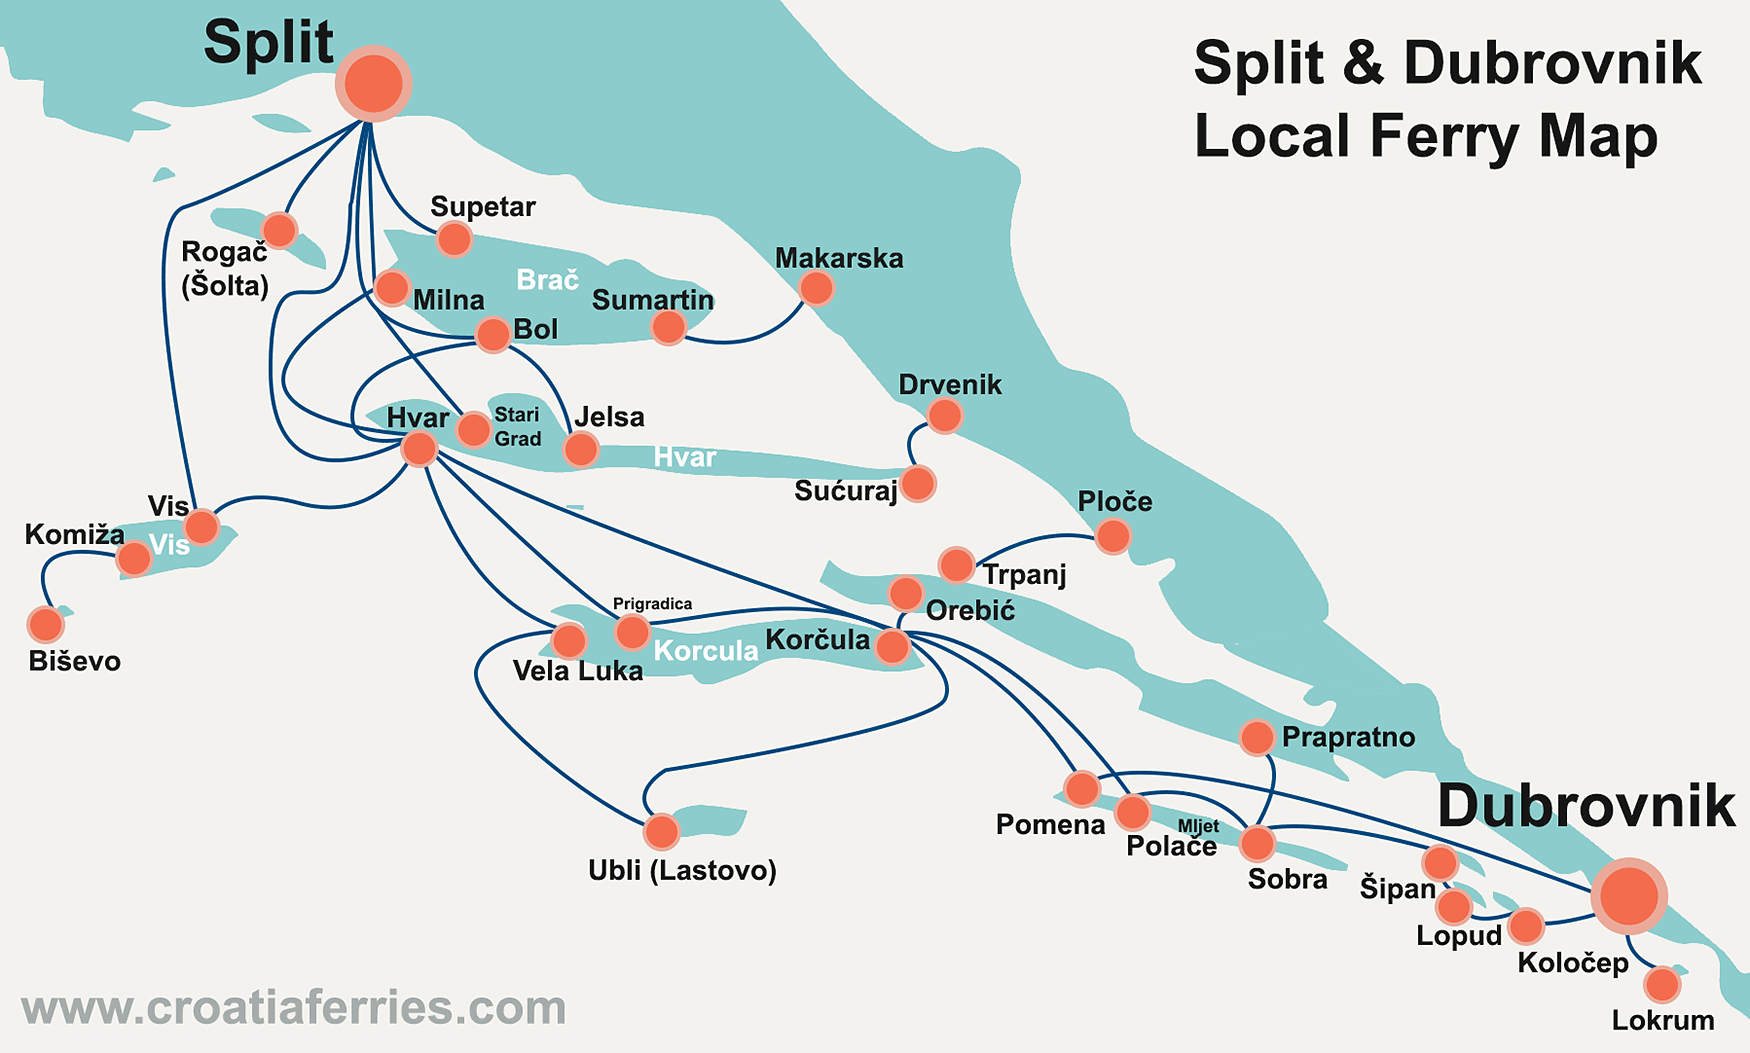 Split, Dubrovnik and Islands Local Ferry Map - Ferries